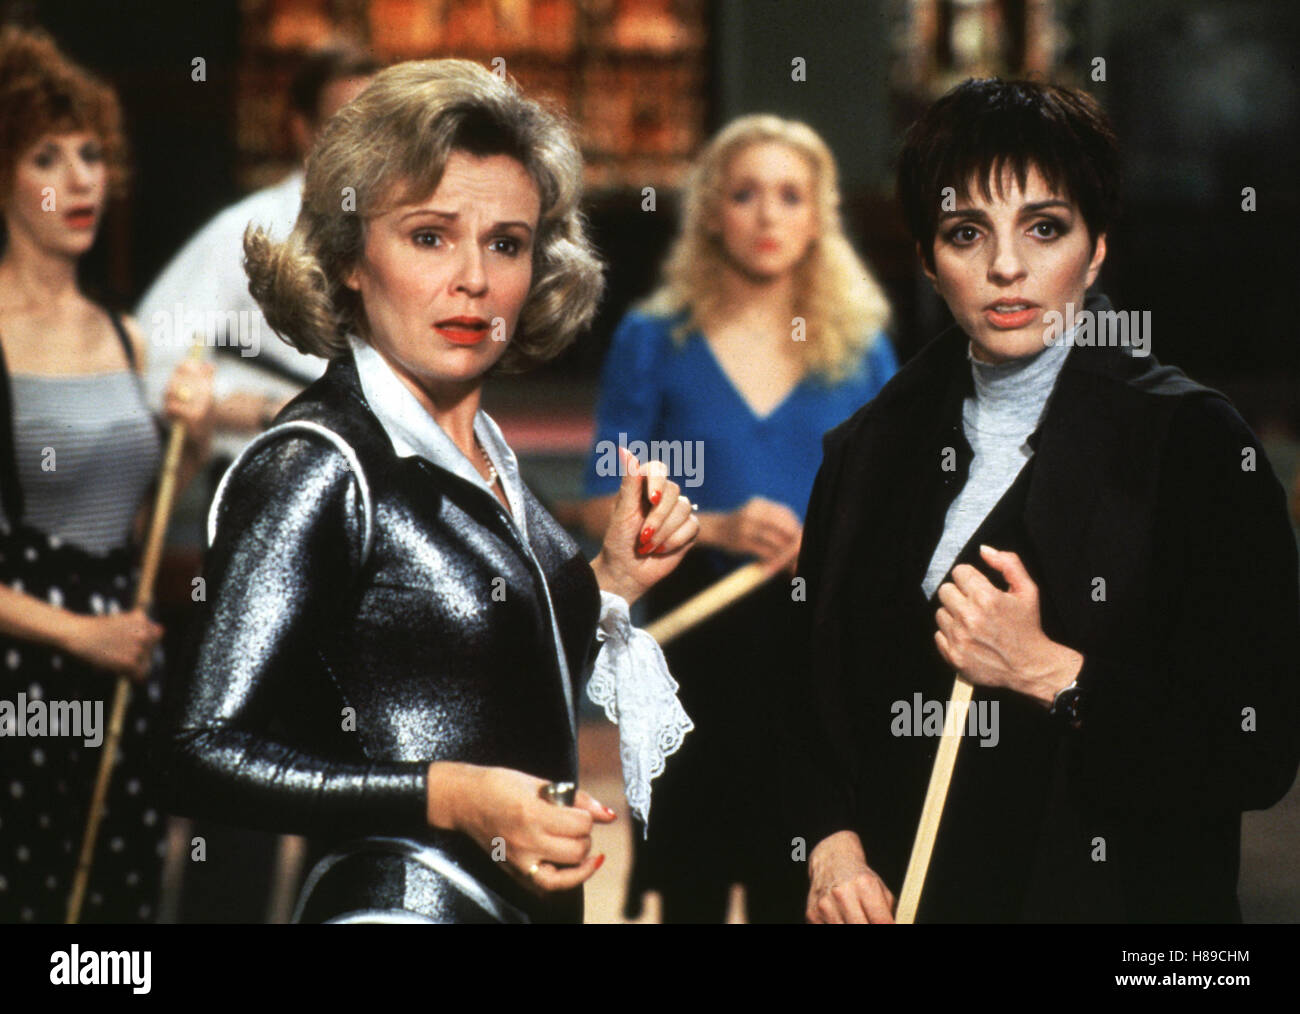 Stepping out, (STEPPING OUT) USA - CAN 1991, Regie: Lewis Gilbert, JULIE WALTERS, LIZA MINELLI Stock Photo